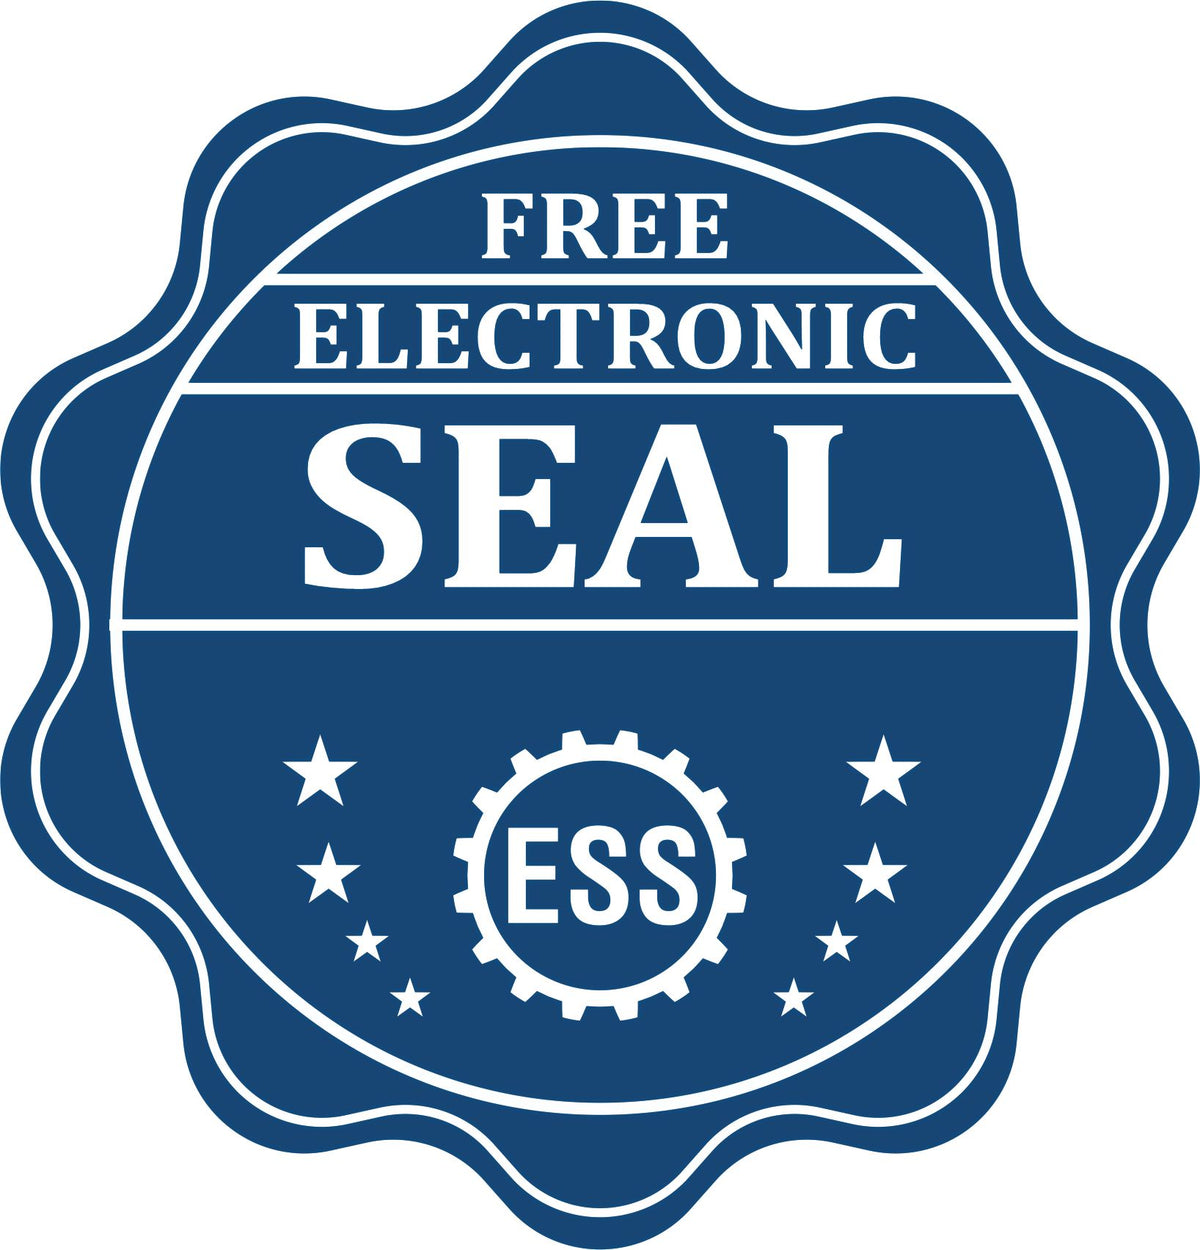 A badge showing a free electronic seal for the Handheld Alabama Architect Seal Embosser with stars and the ESS gear on the emblem.